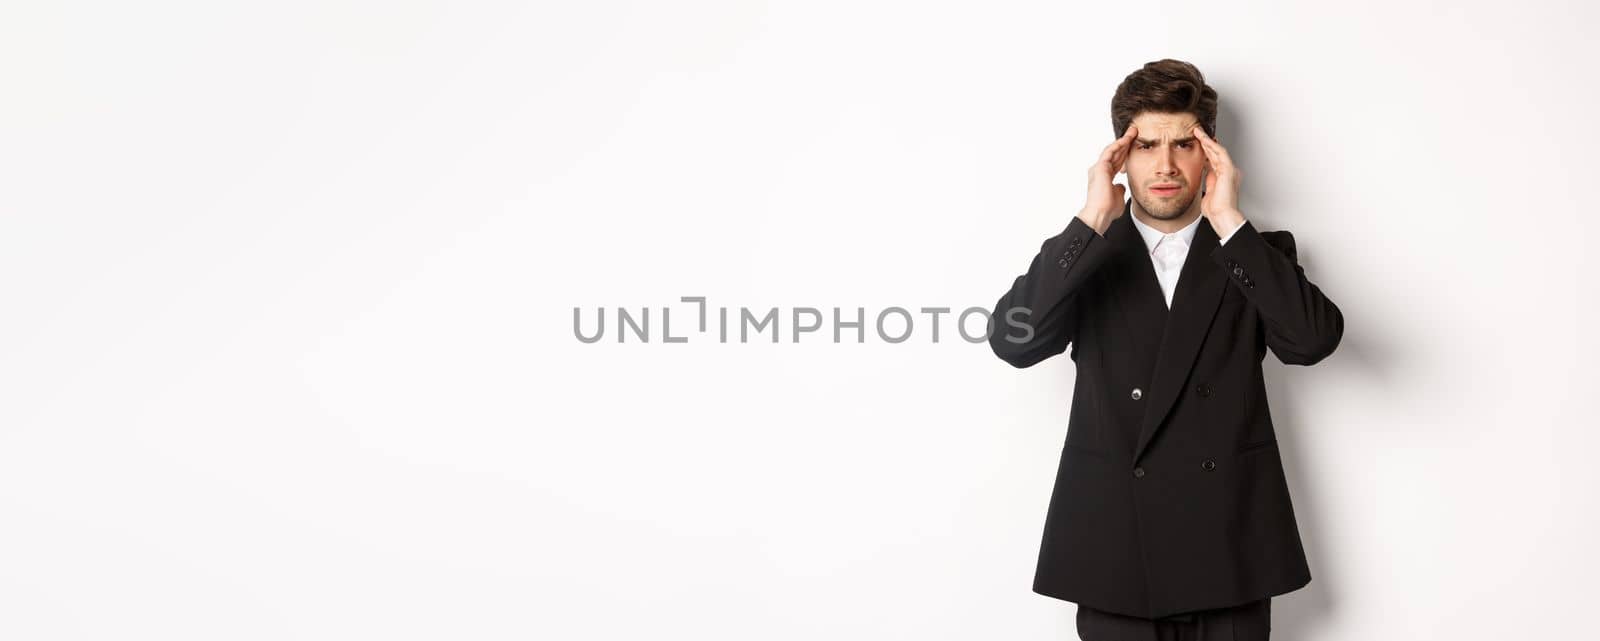 Image of businessman in black suit, touching head and looking dizzy, feeling painful headache, standing over white background.